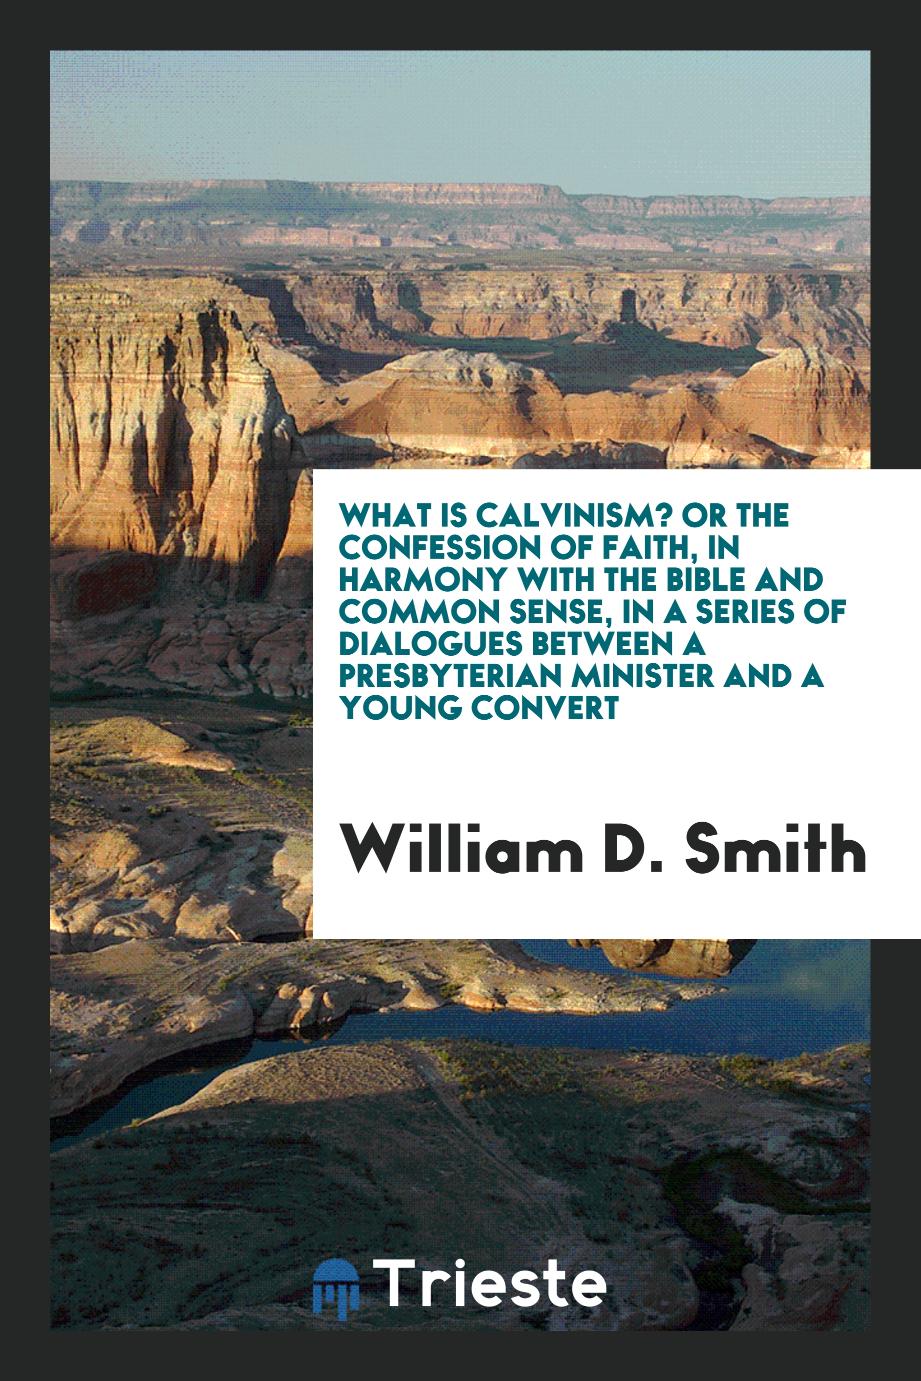 What is Calvinism? Or the confession of faith, in harmony with the Bible and common sense, in a series of dialogues between a Presbyterian minister and a young convert